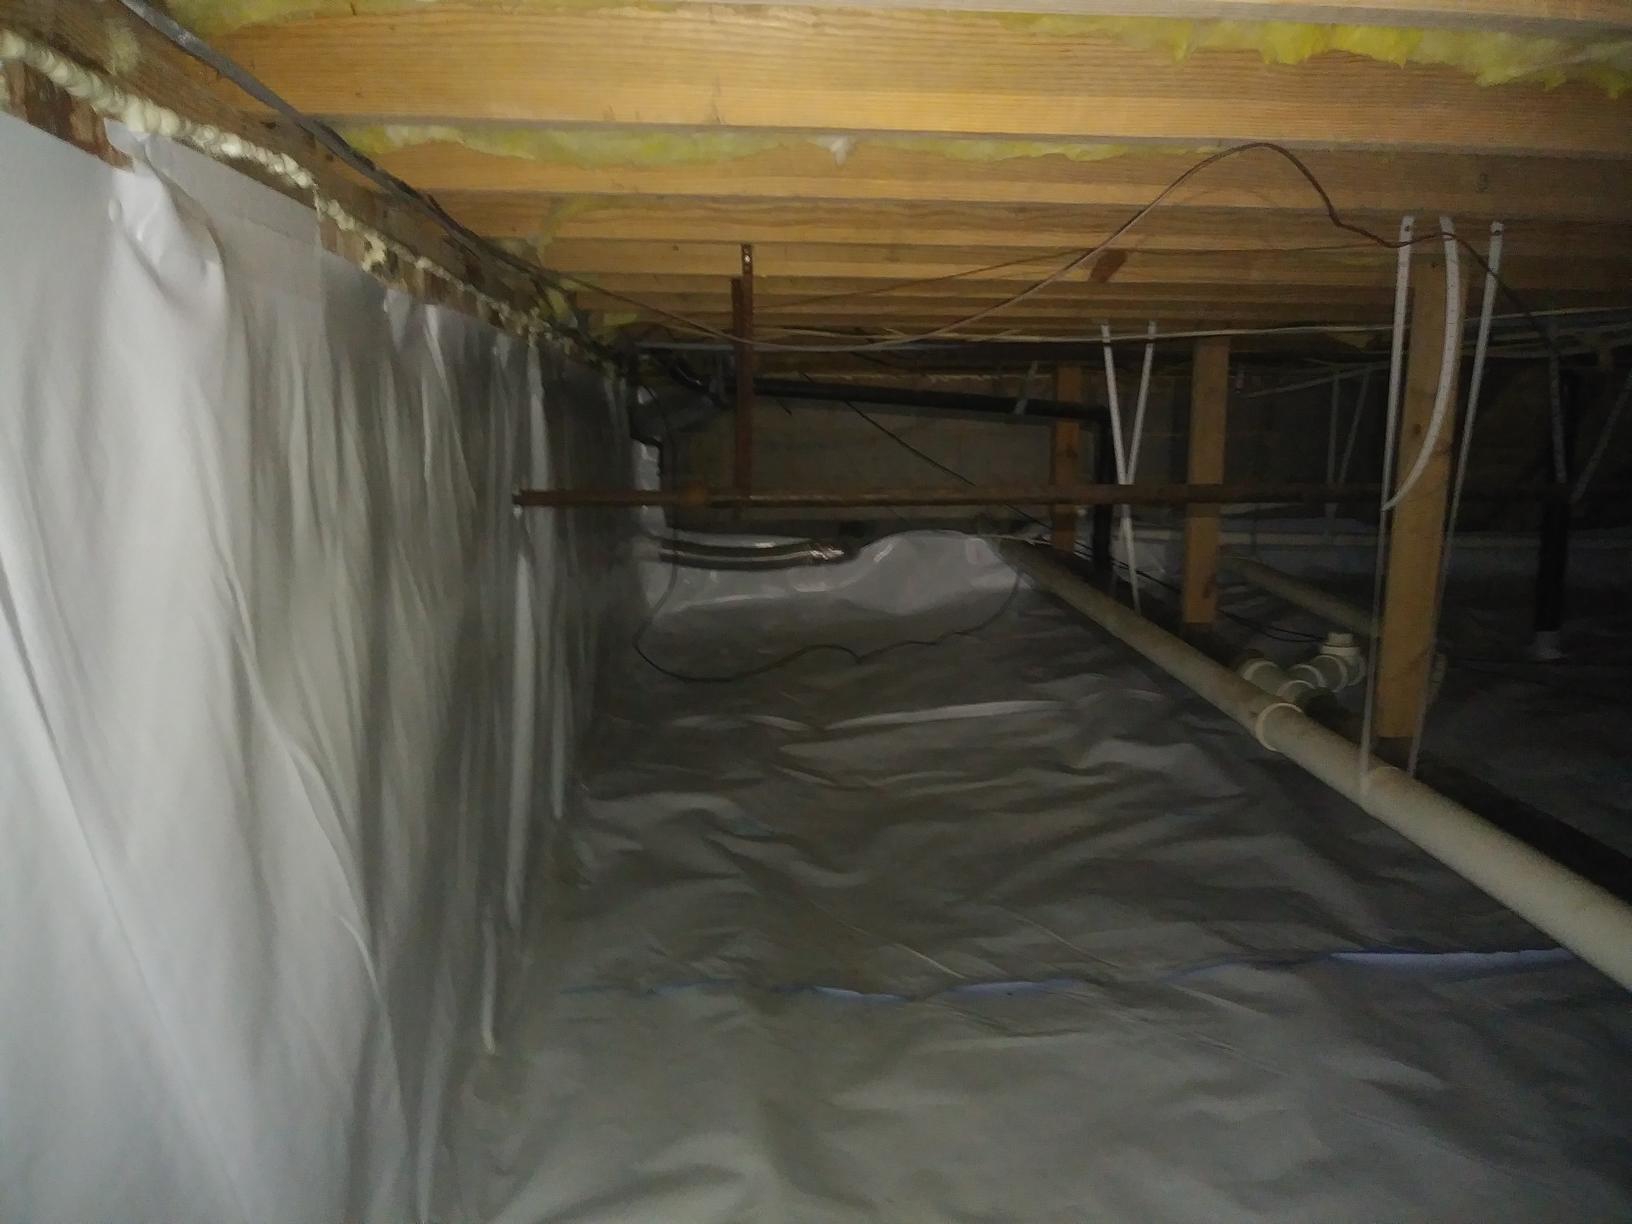 Crawl Space Liner Installation in Raleigh, NC